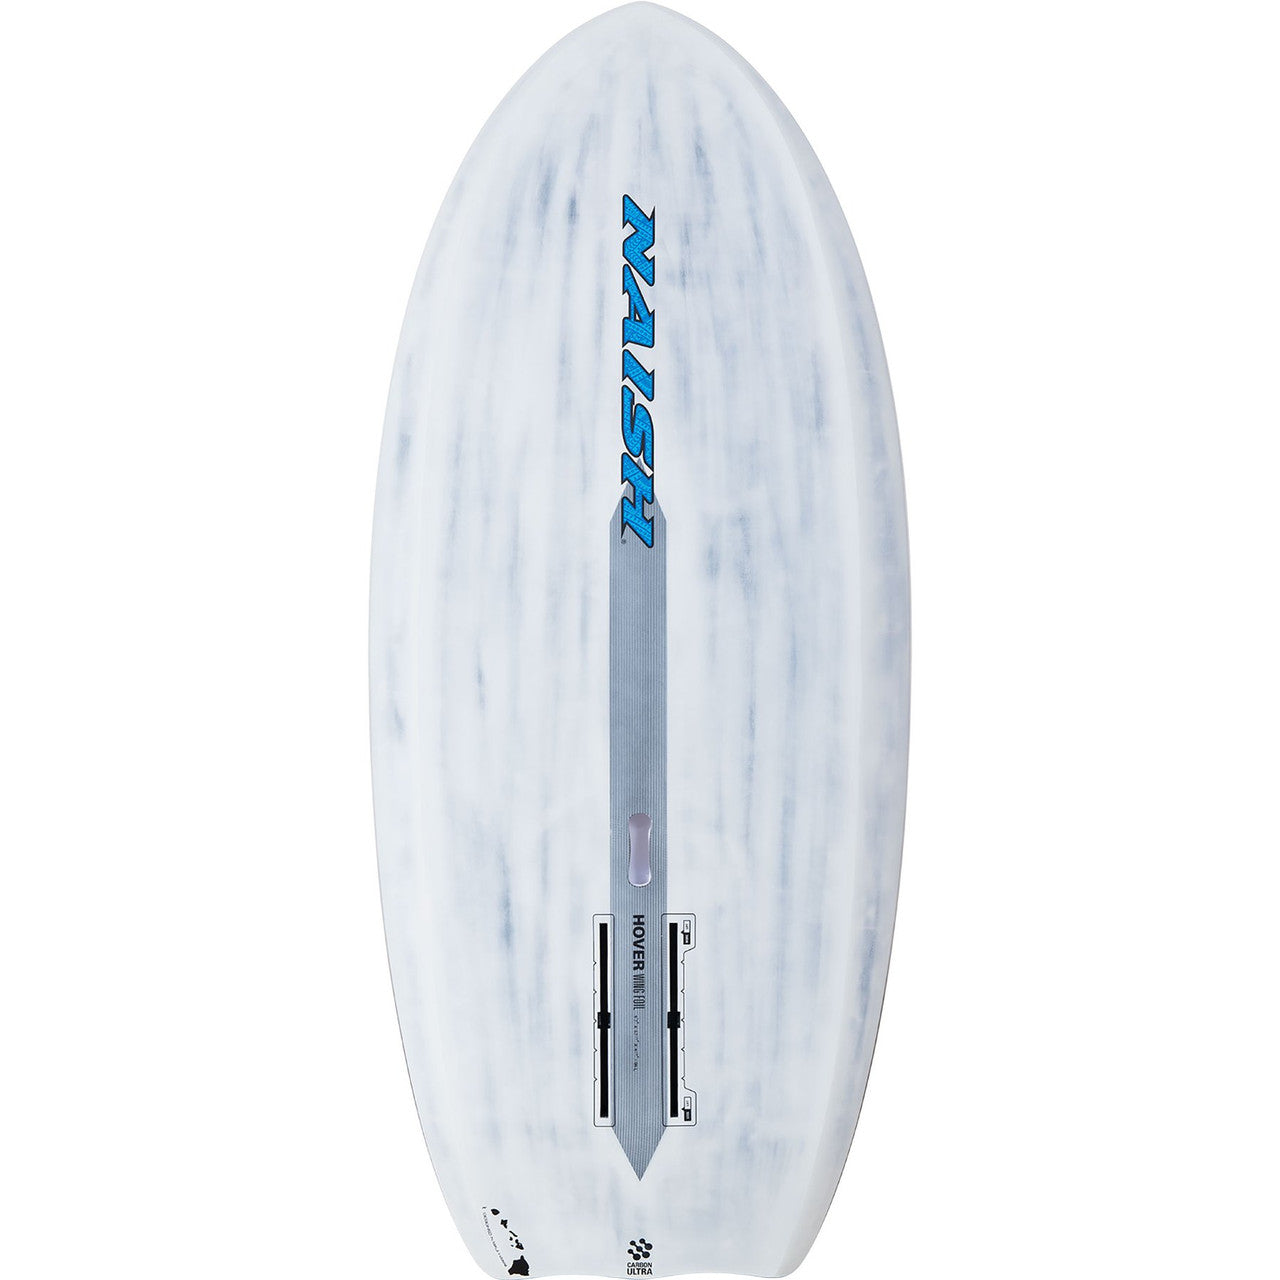 Naish Hover Wing Foil Carbon Ultra 2022 Wing-Surfing/Foil SUP 50 Liter